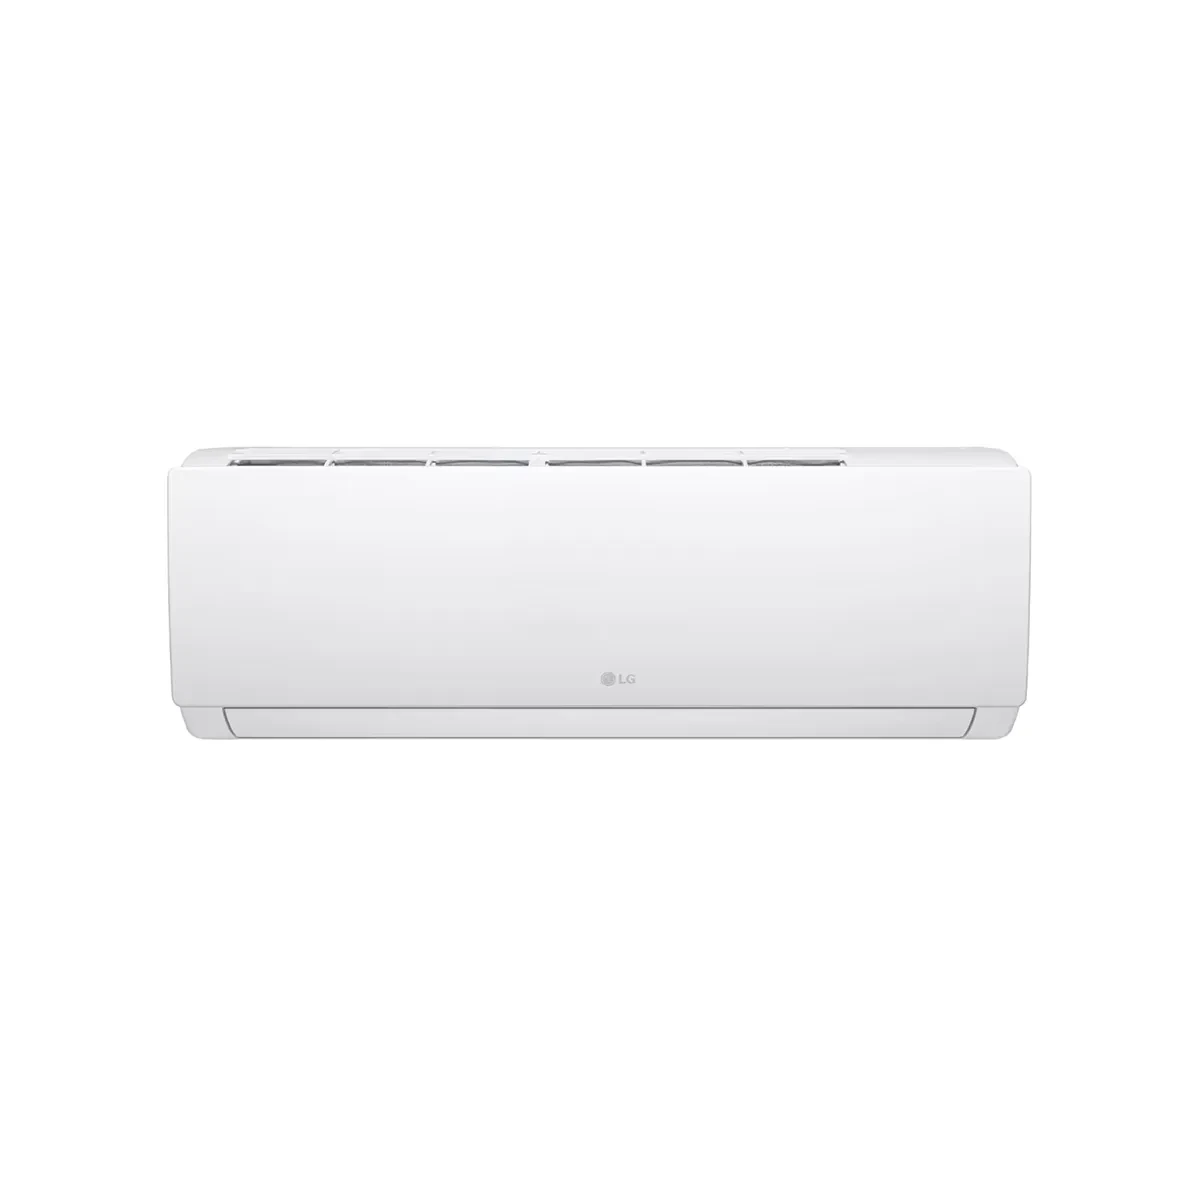 LG - Air condition, Split, HERO 1.5HP,cooling & Heating, white